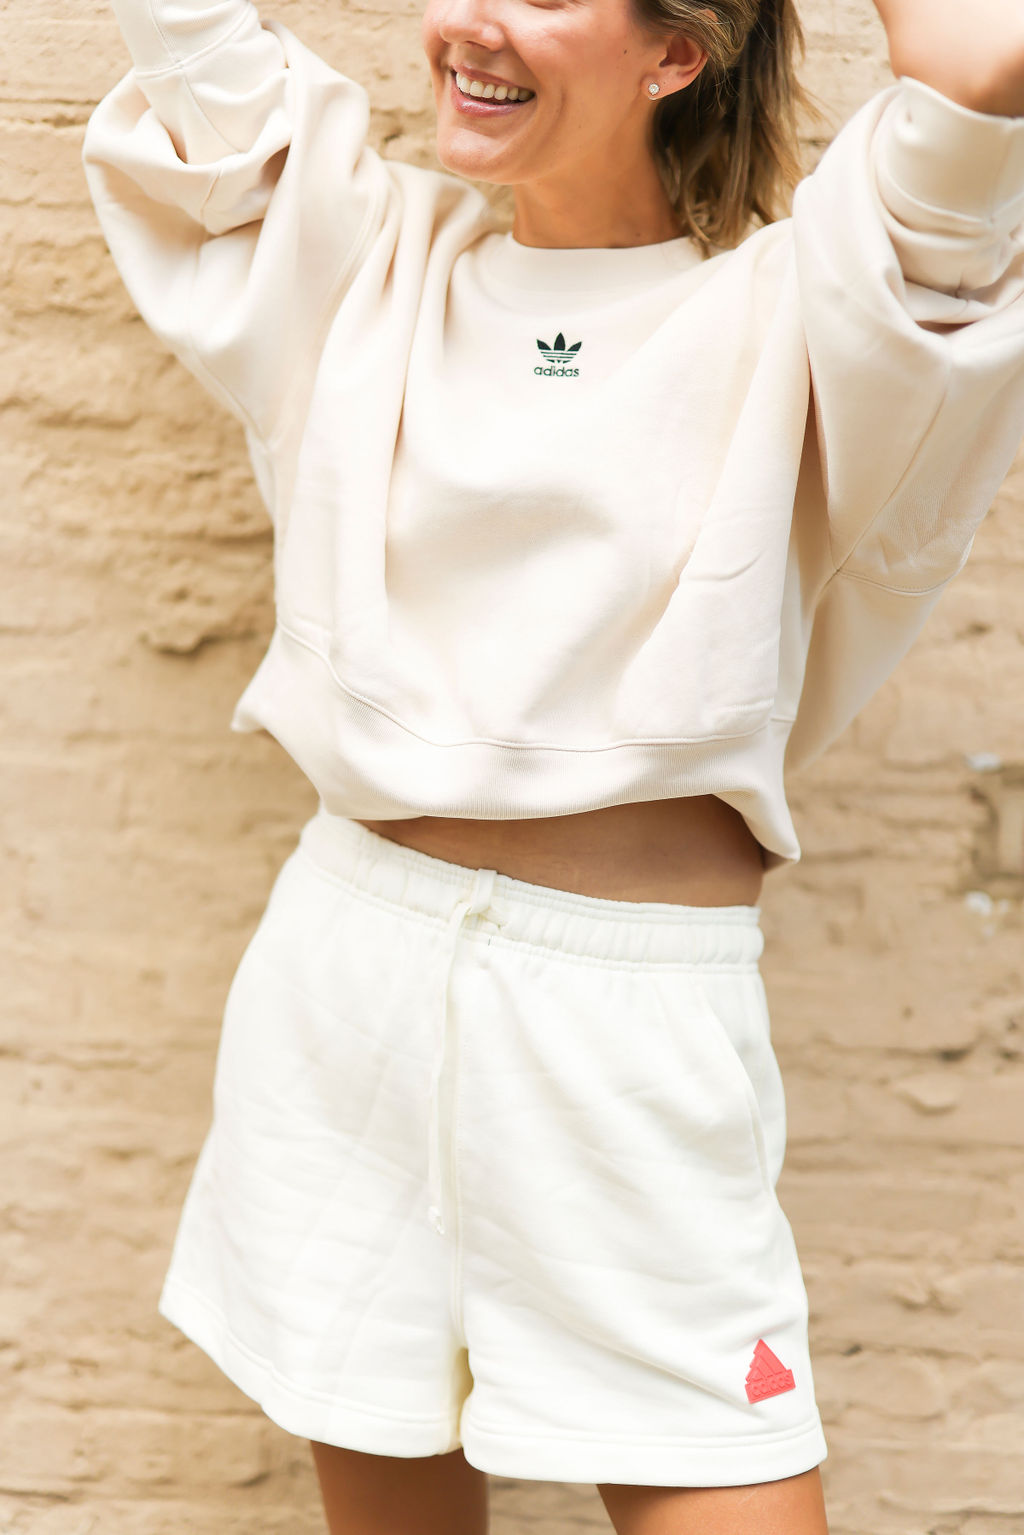 woman smiling and wearing adidas clothes